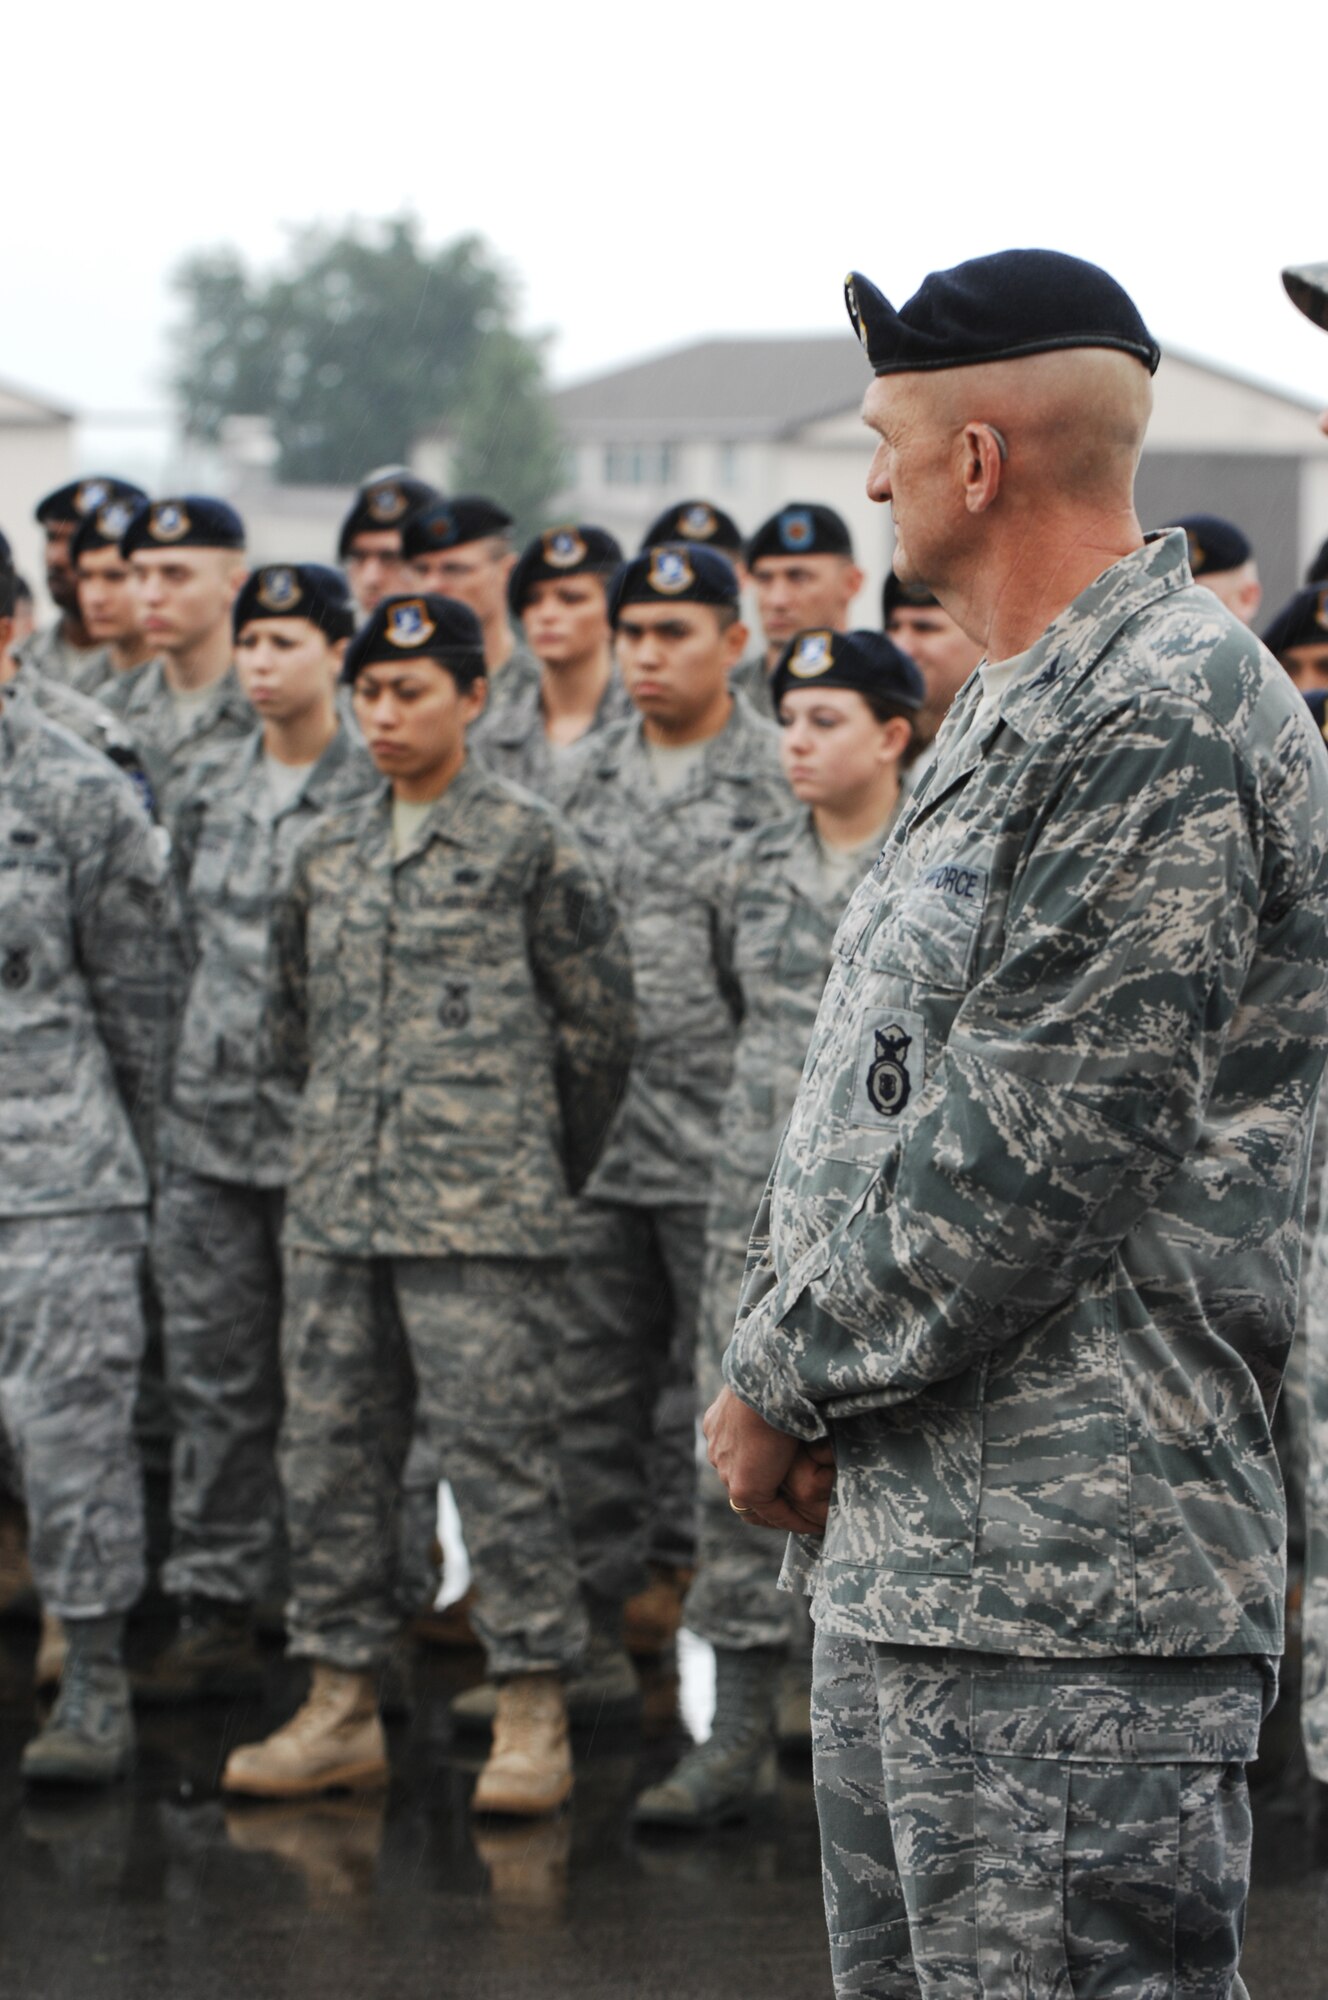 United States Air Force Col. Neil Rader, Chief of Security Forces, takes a moment of silence during a Final Guard Mount Ceremony, May 15, 2009, Ramstein Air Base, Germany. Final Guard Mount is one of many events taking place in celebration of National Police Week, a solemn period each year where every officer reflects on those who have fallen. (U.S. Air Force photo by Senior Airman Amber Bressler)